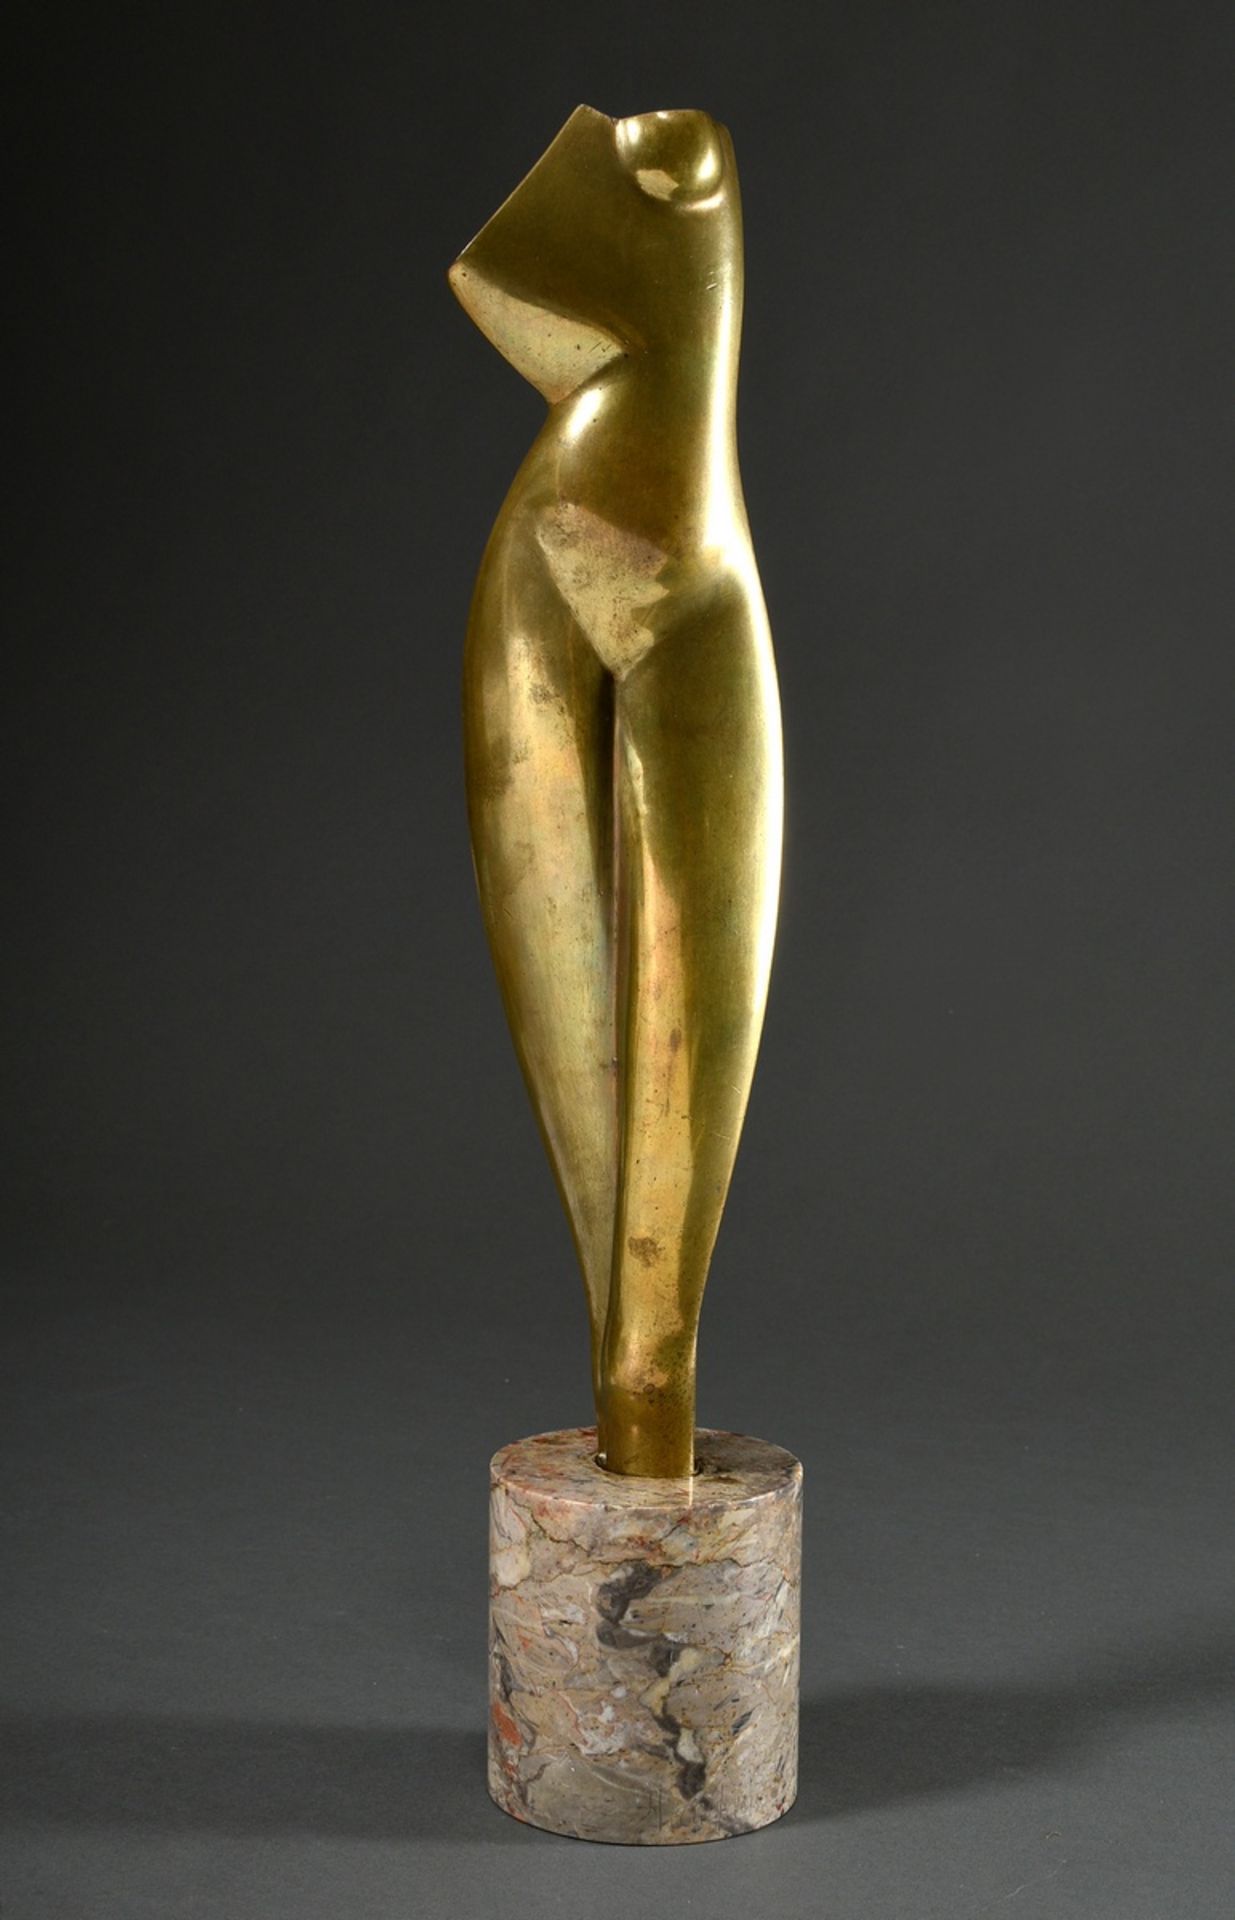 Archipenko, Alexander (1887-1964) "Flat Torso" 1914, early life cast around 1920, bronze with gold- - Image 2 of 17